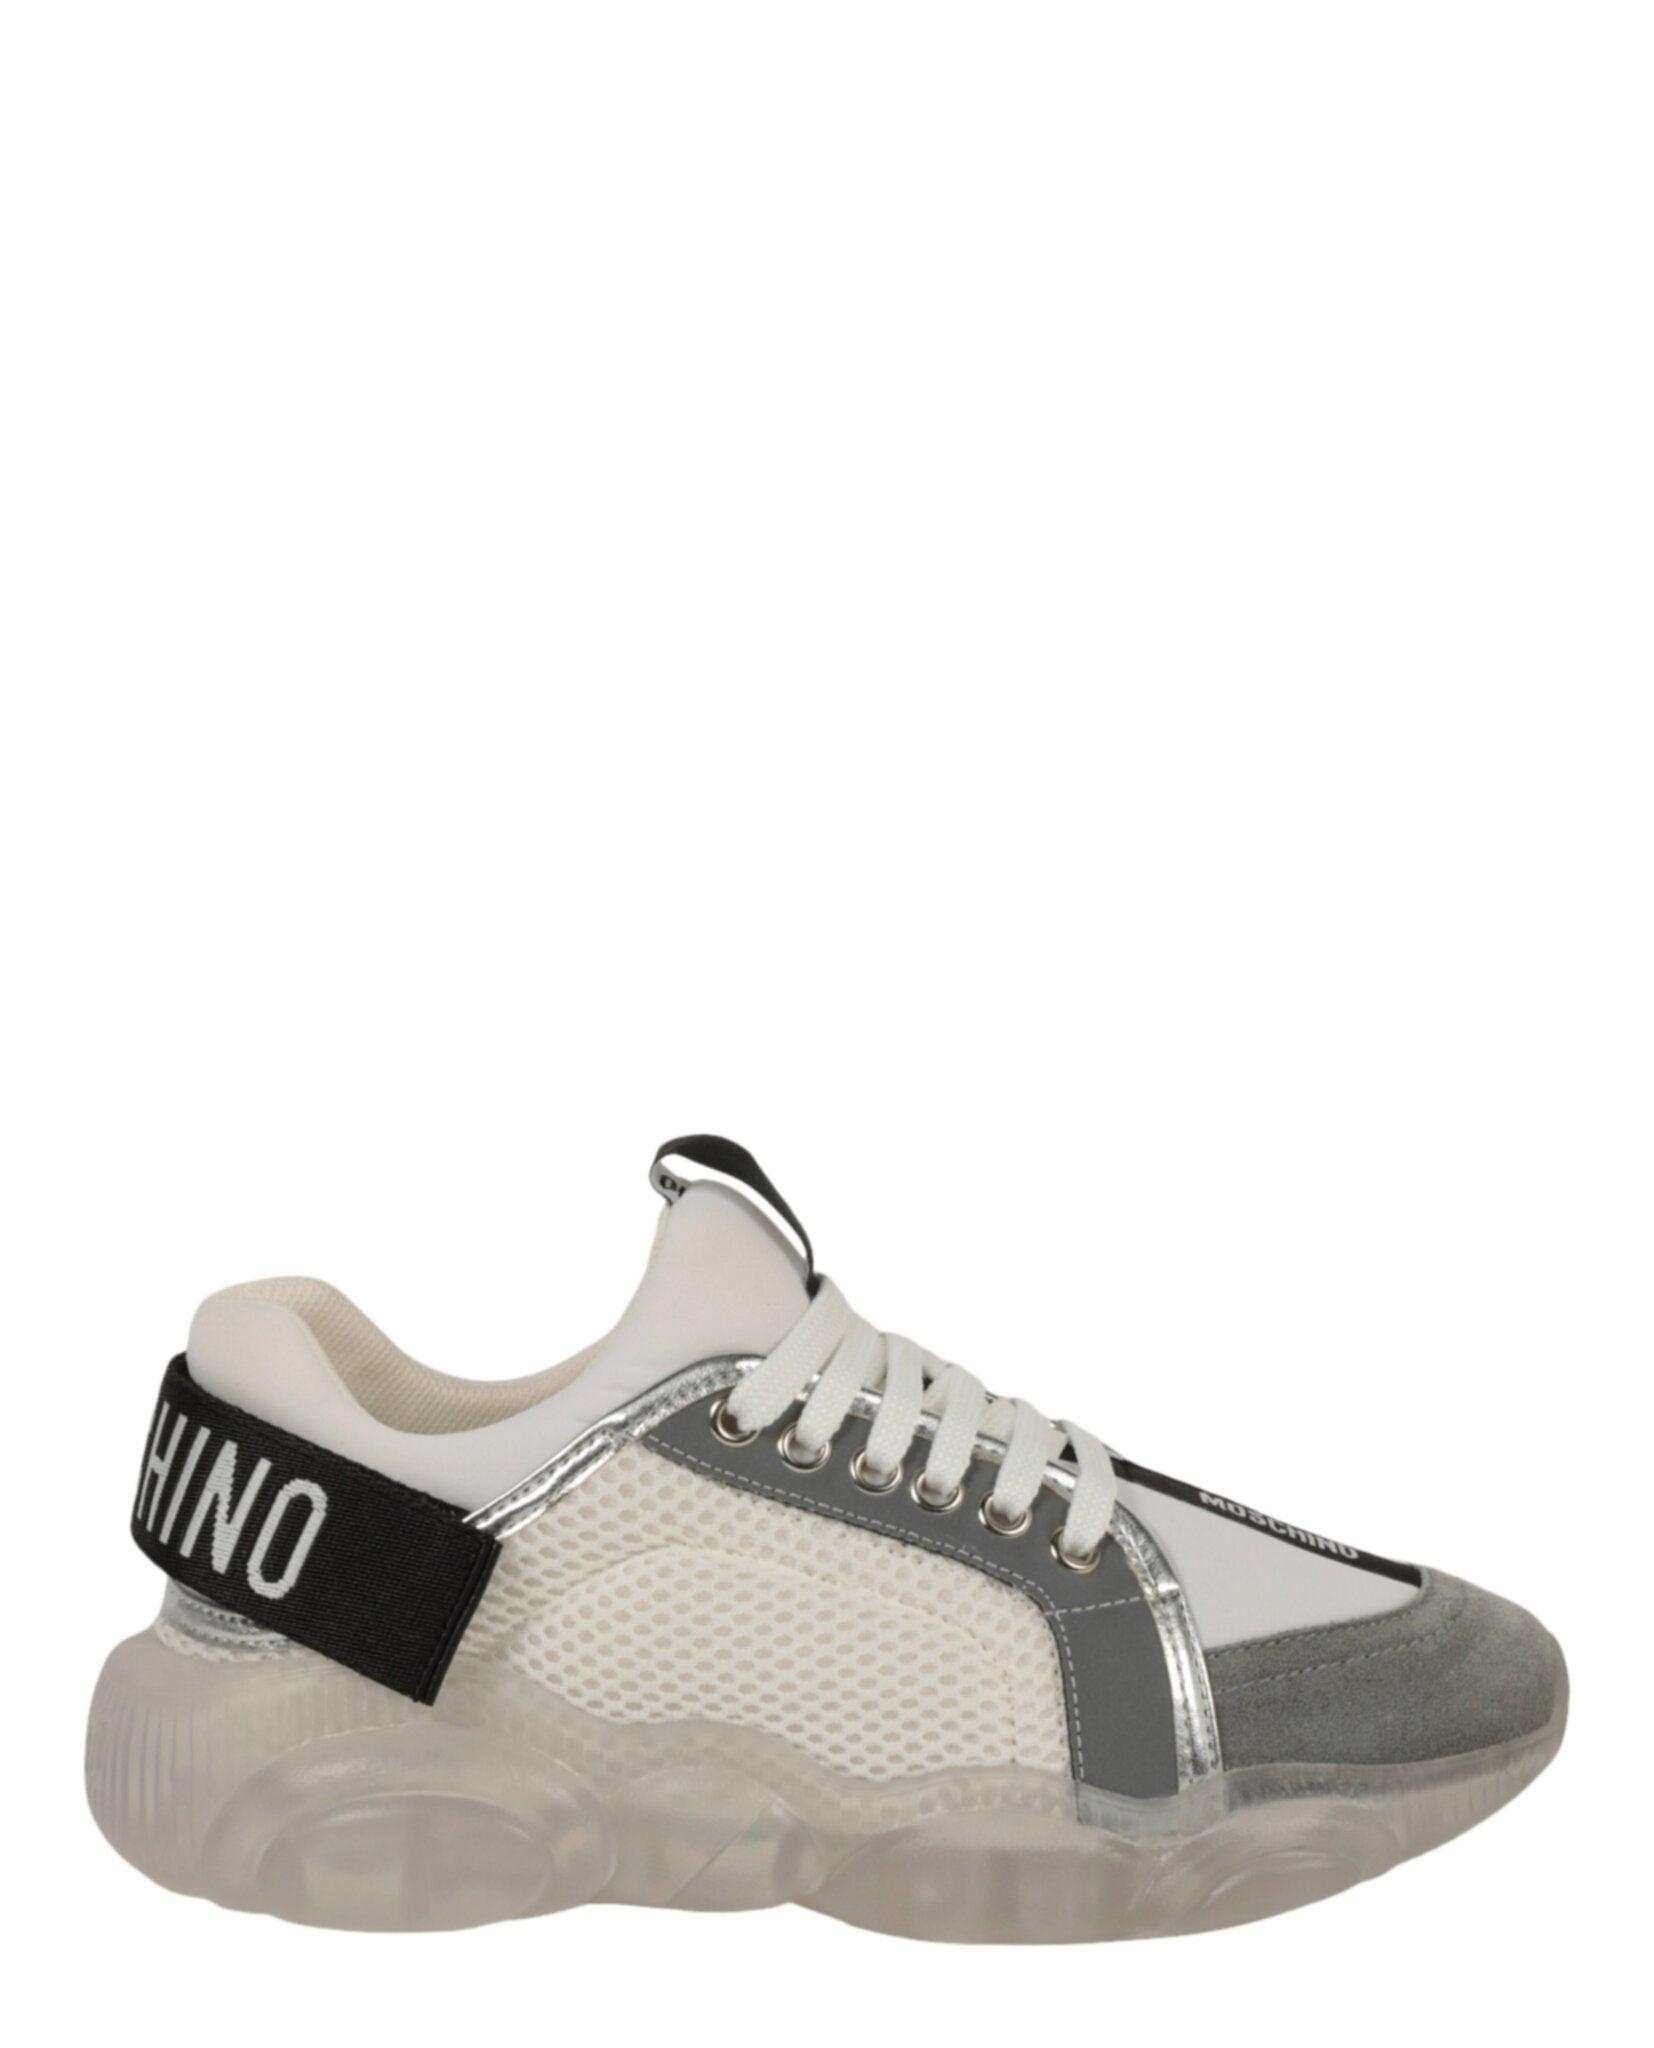 Moschino Teddy Run Sneakers With Strap in White | Lyst